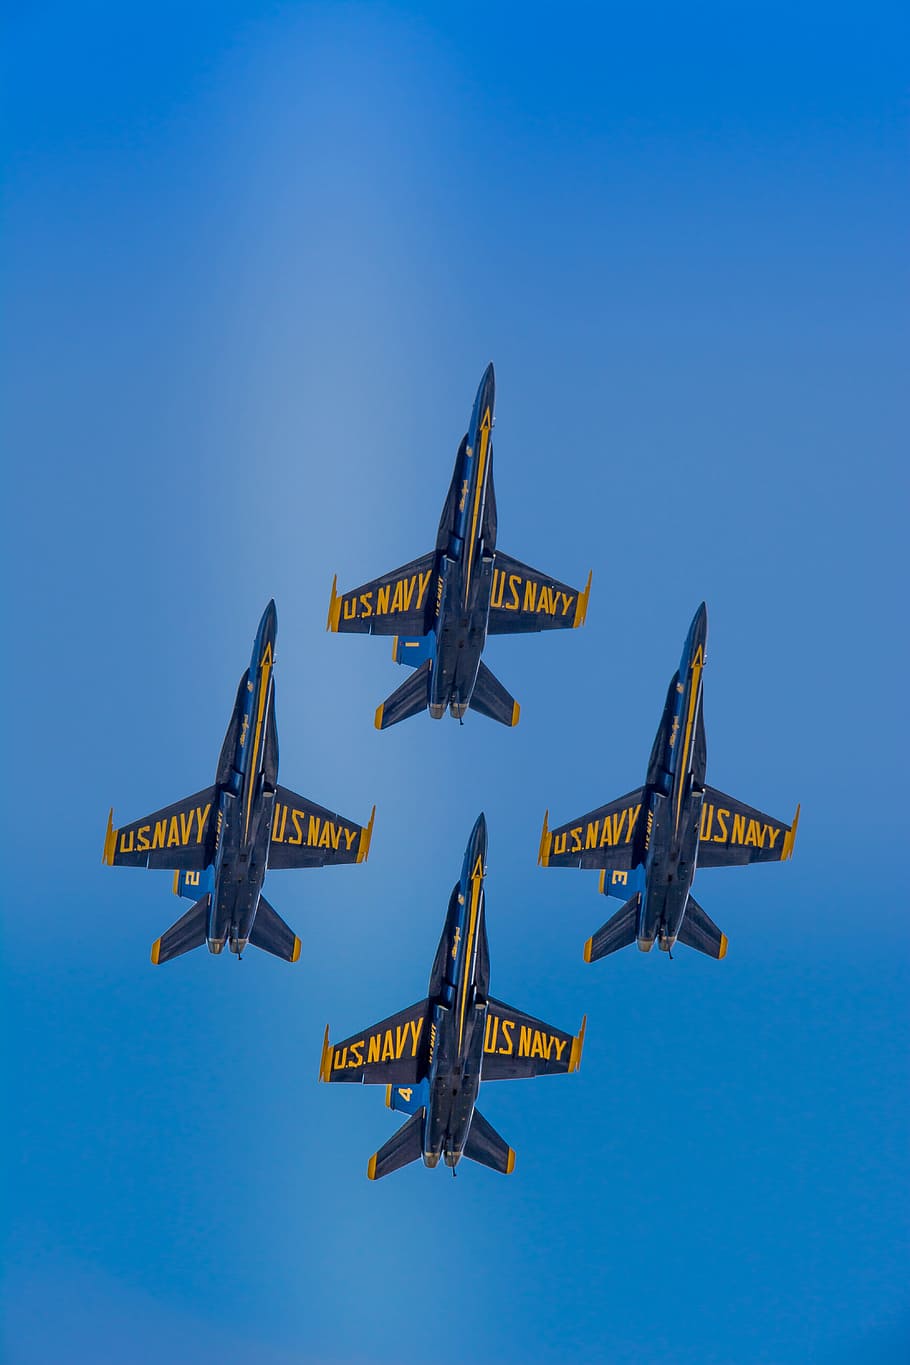 Blue Angels, F-18, Hornet, Fly, Navy, jet, airplane, formation, HD wallpaper